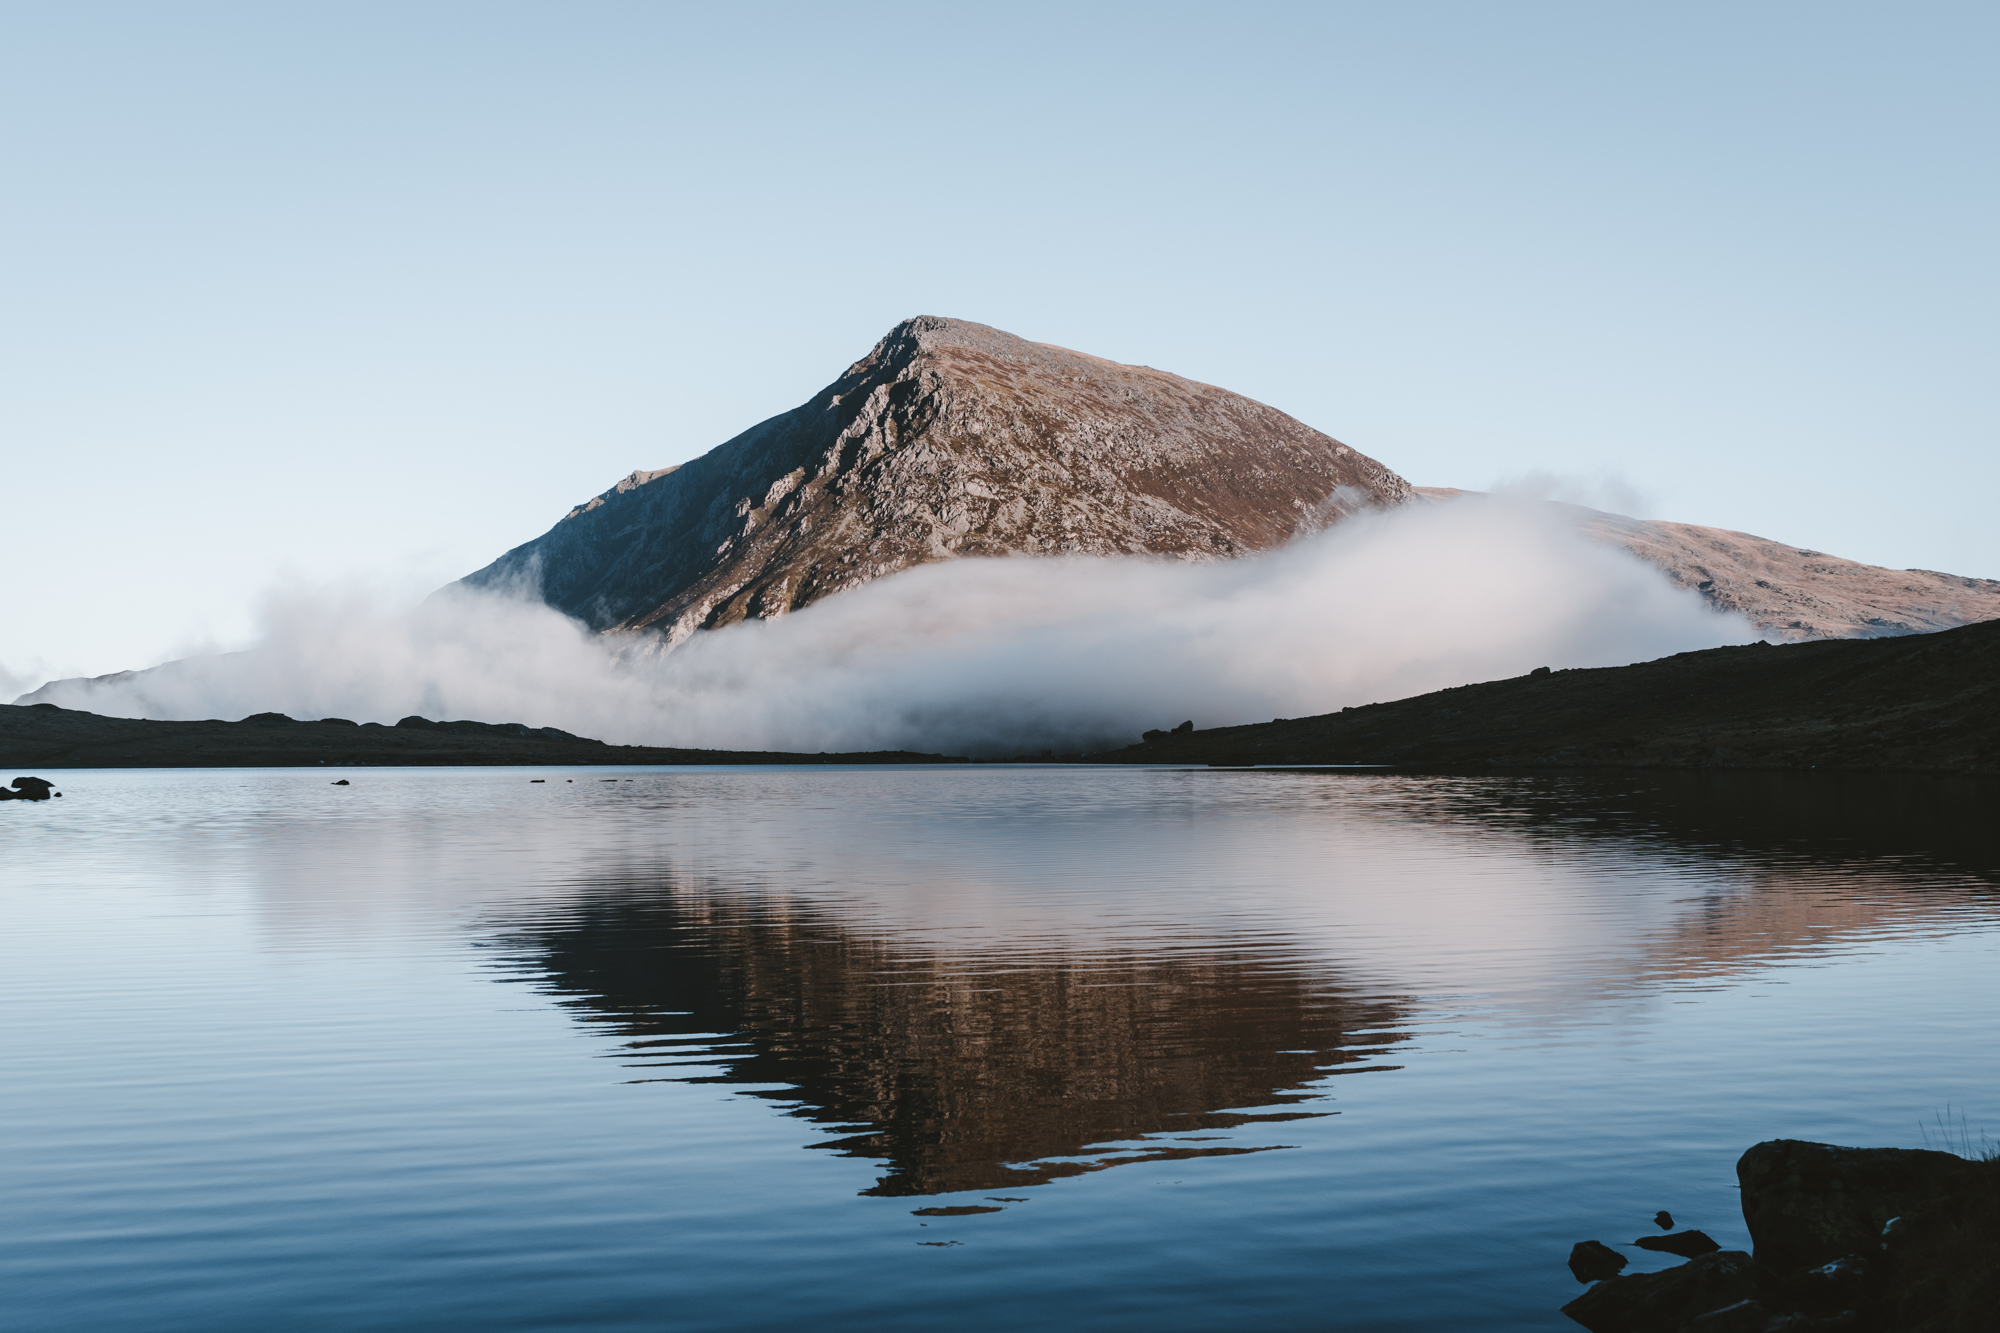 Image of a mountain with low cloud and a lake in the foreground